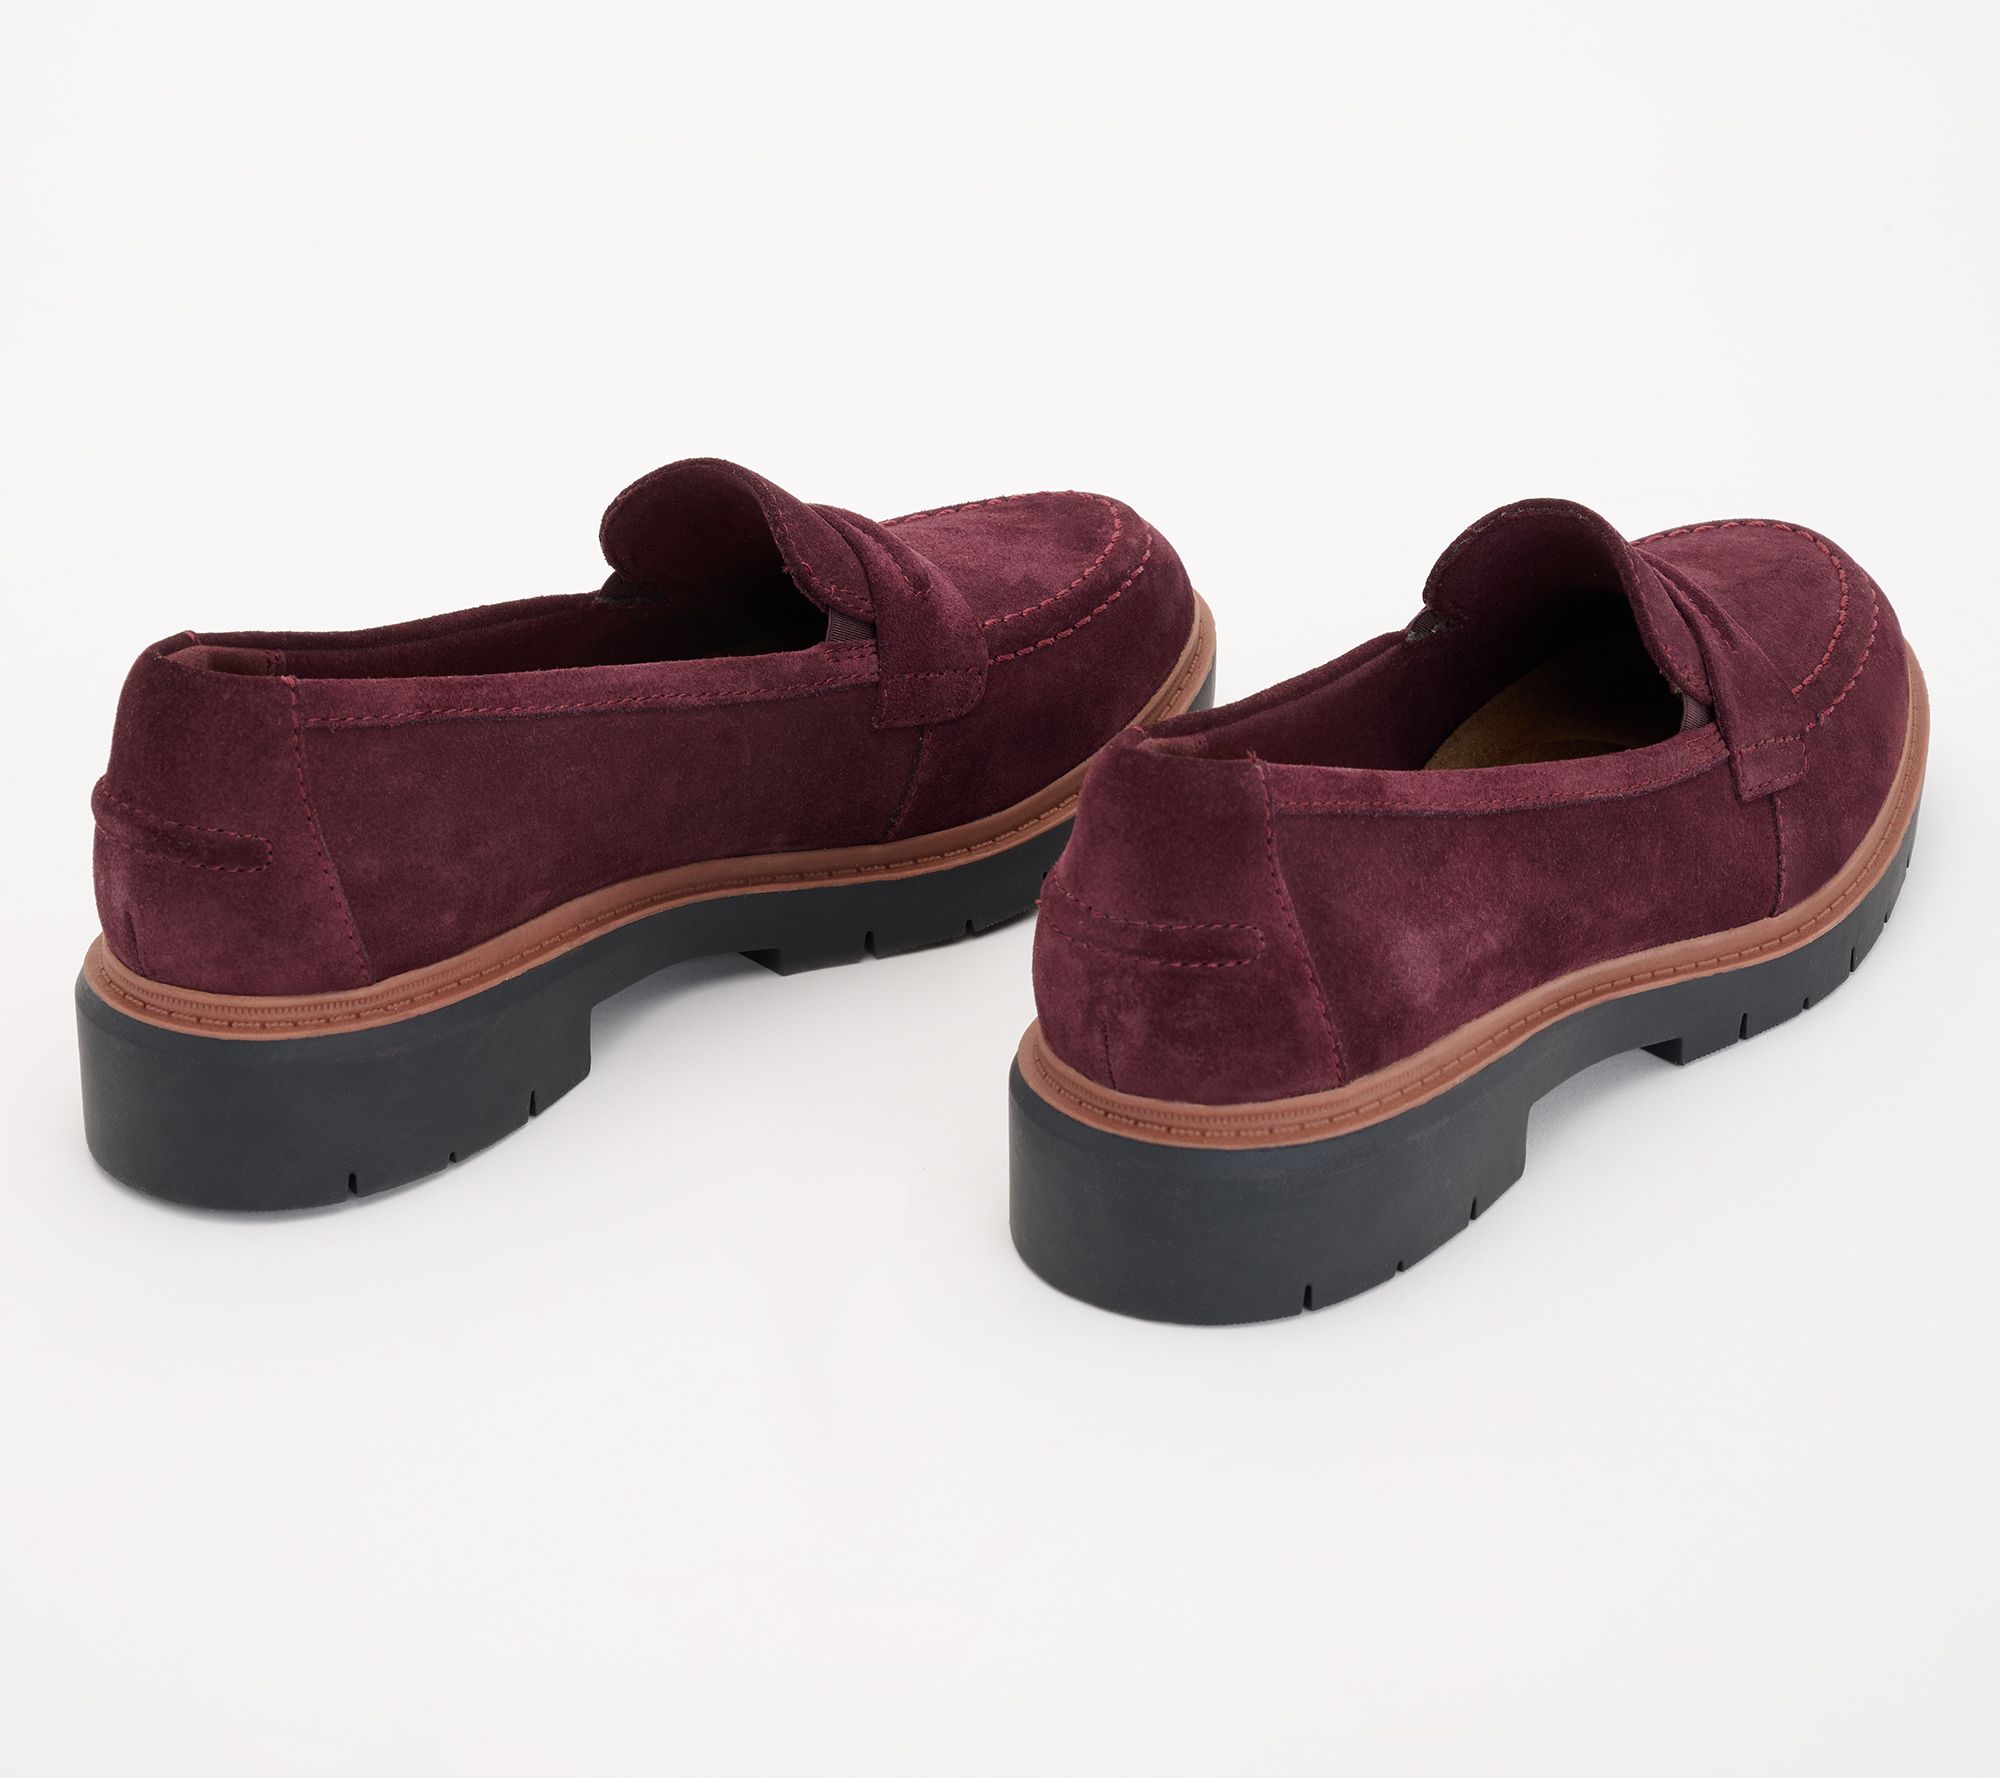 Clarks Collection Leather Loafers- Westlynn Bay - QVC.com